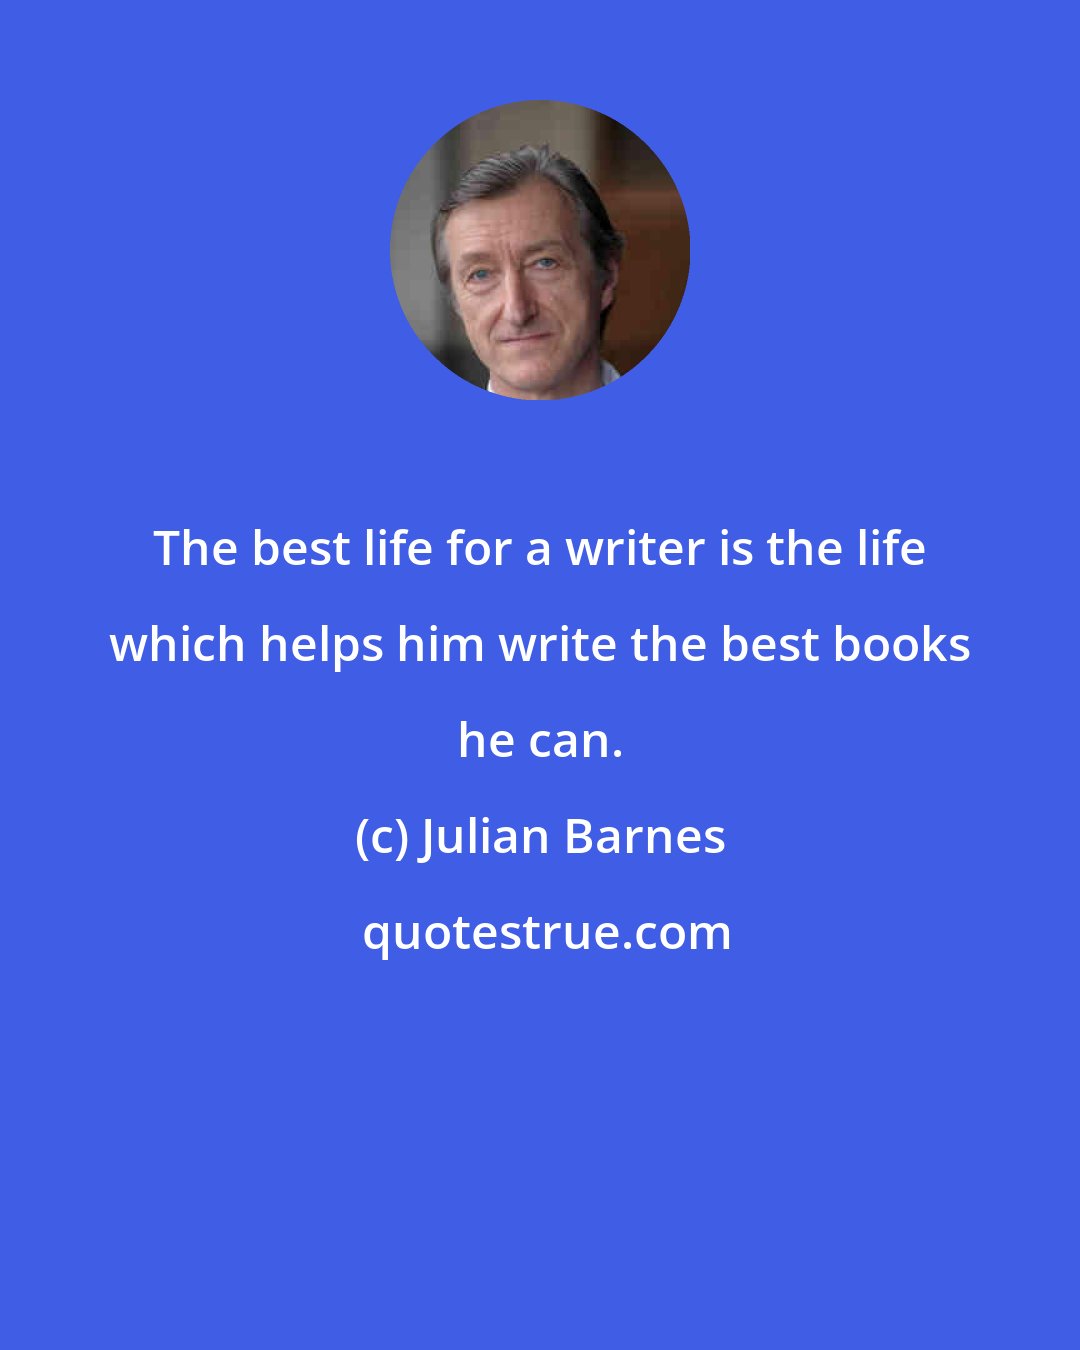 Julian Barnes: The best life for a writer is the life which helps him write the best books he can.